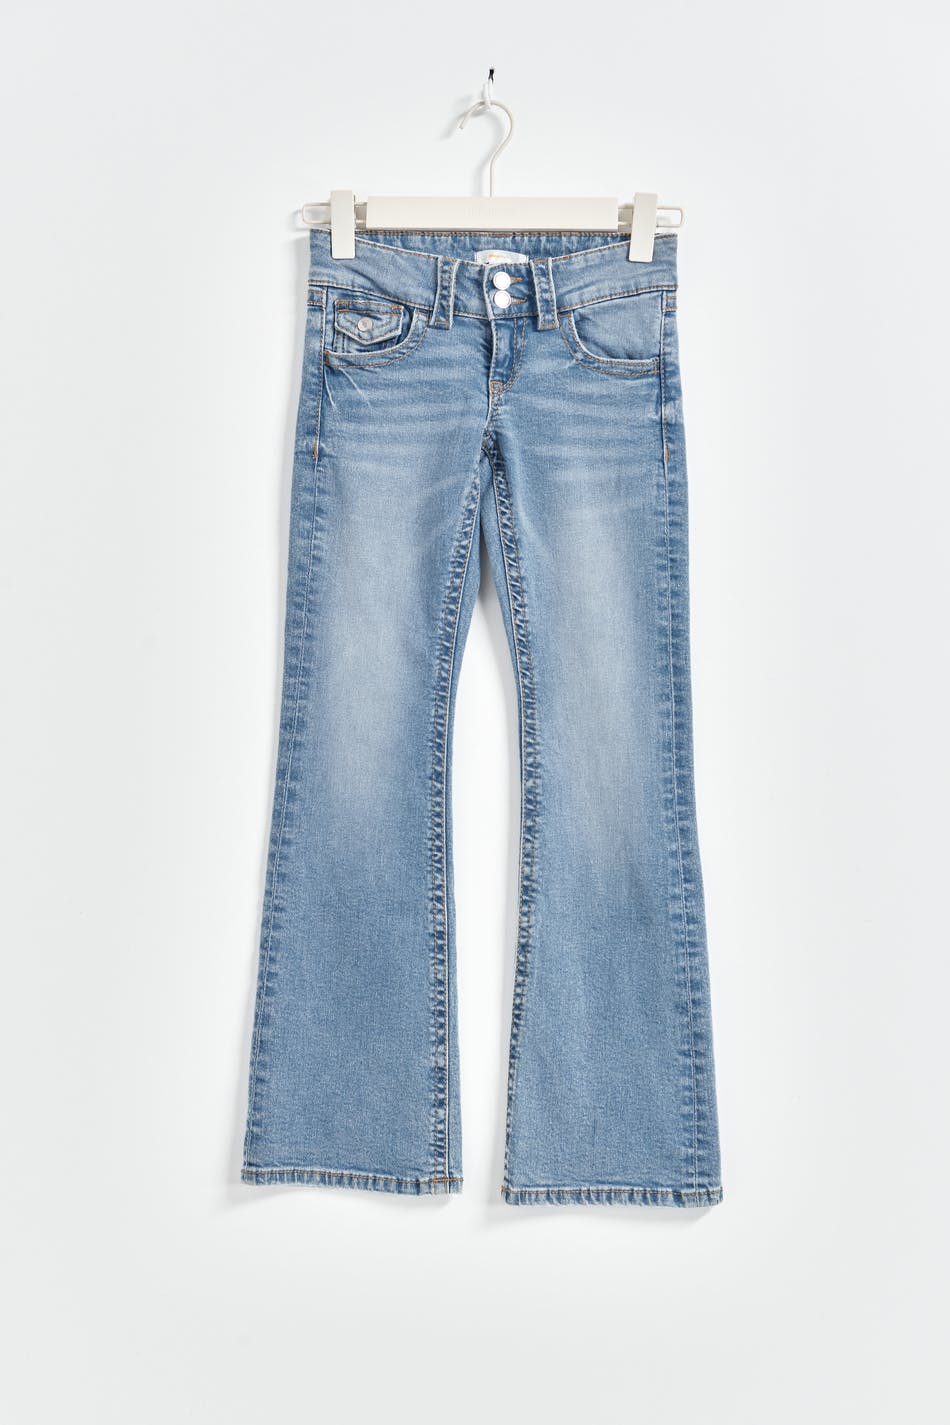 Gina Tricot - Chunky basic tall jeans - wide jeans - Blue - 158 - Female